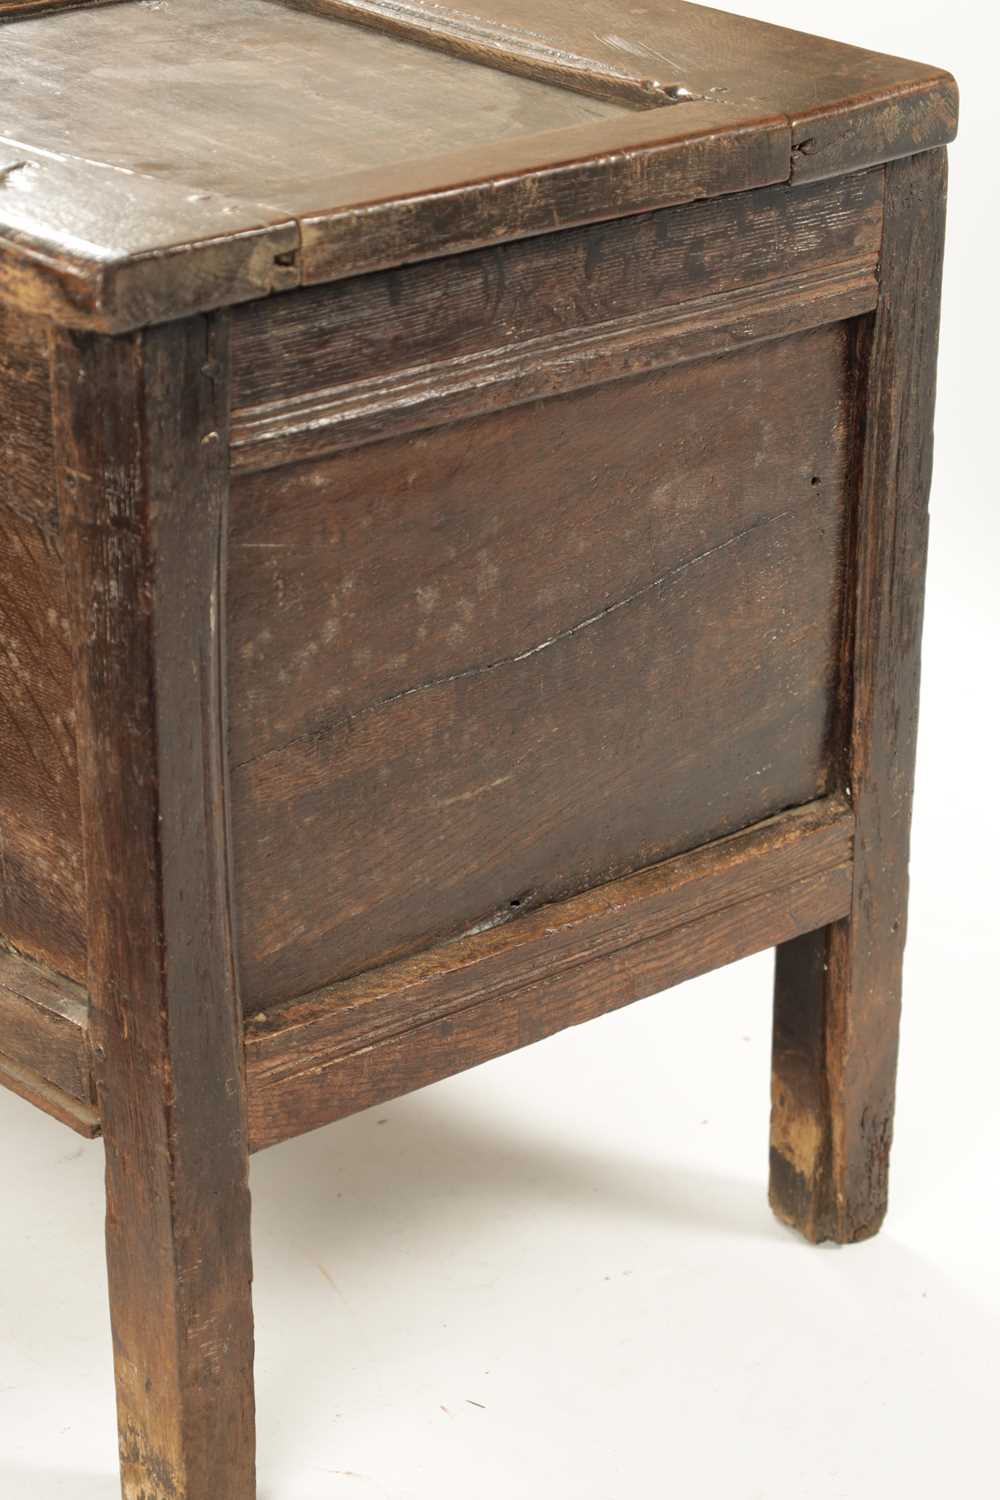 A GOOD SMALL LATE 17TH CENTURY OAK PANELLED COFFER - Image 11 of 11